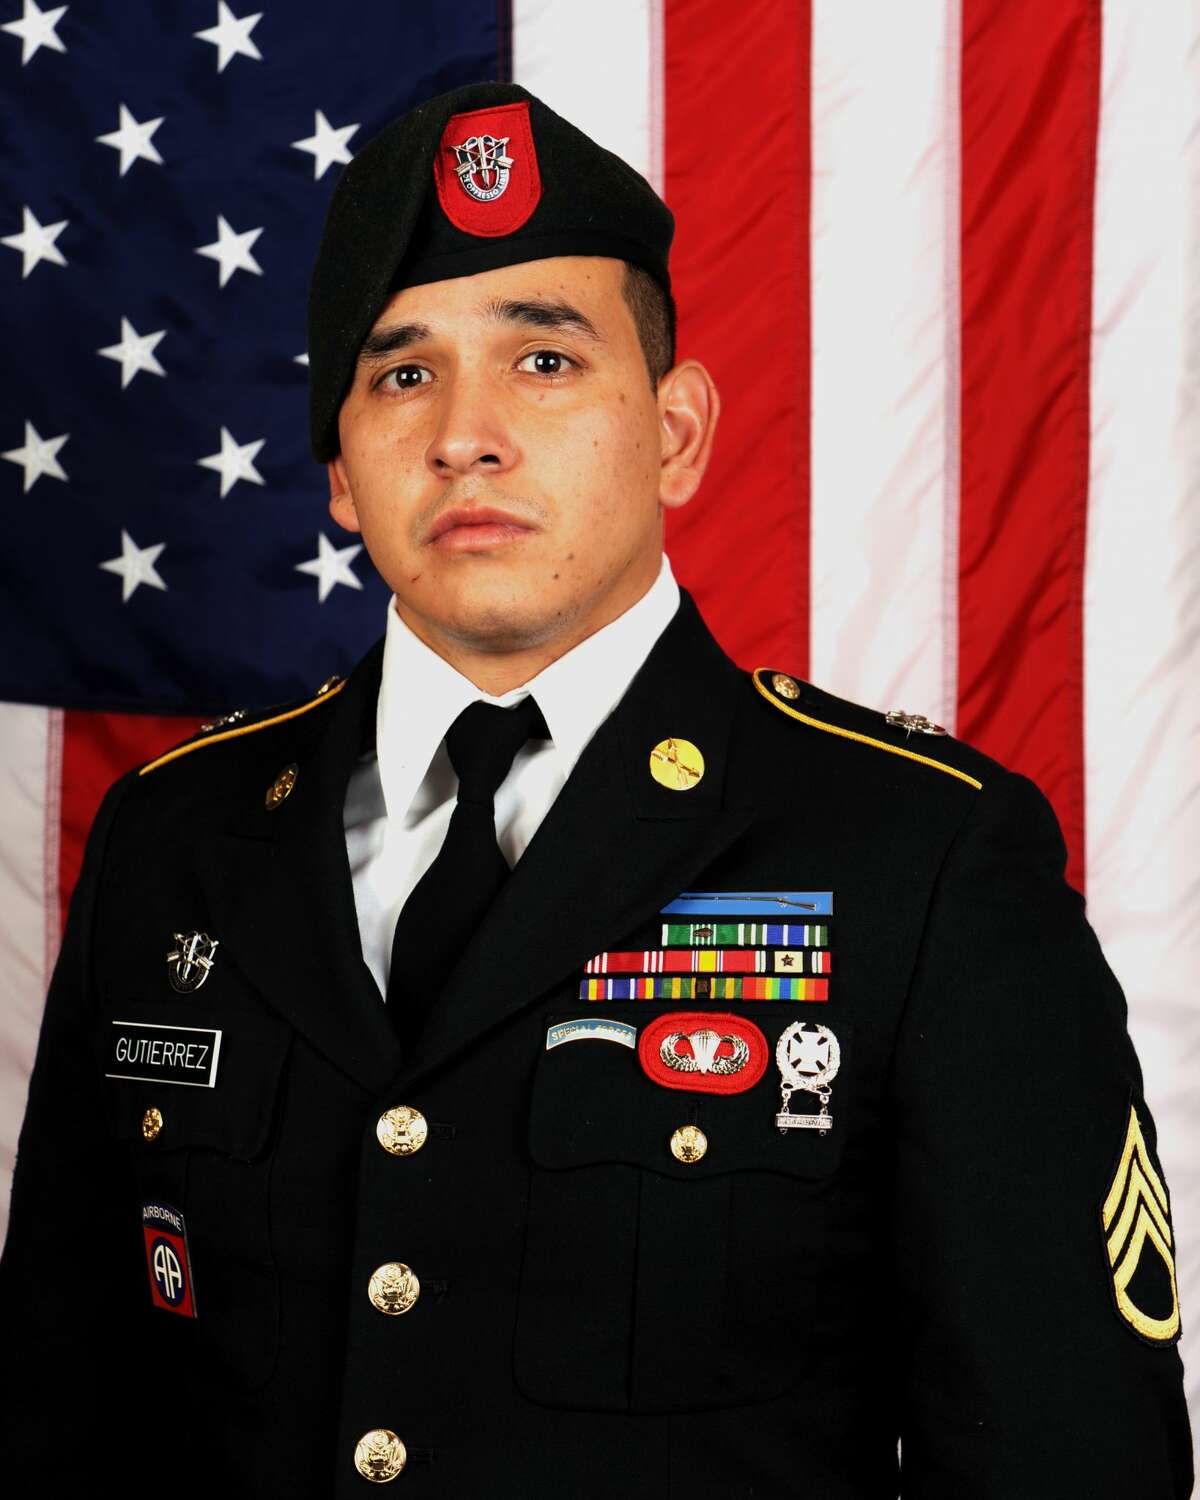 Sgt. 1st Class Javier J. Gutierrez, 28, of San Antonio, Texas, died February 8, from wounds sustained during combat operations in Nangarhar Province, Afghanistan.